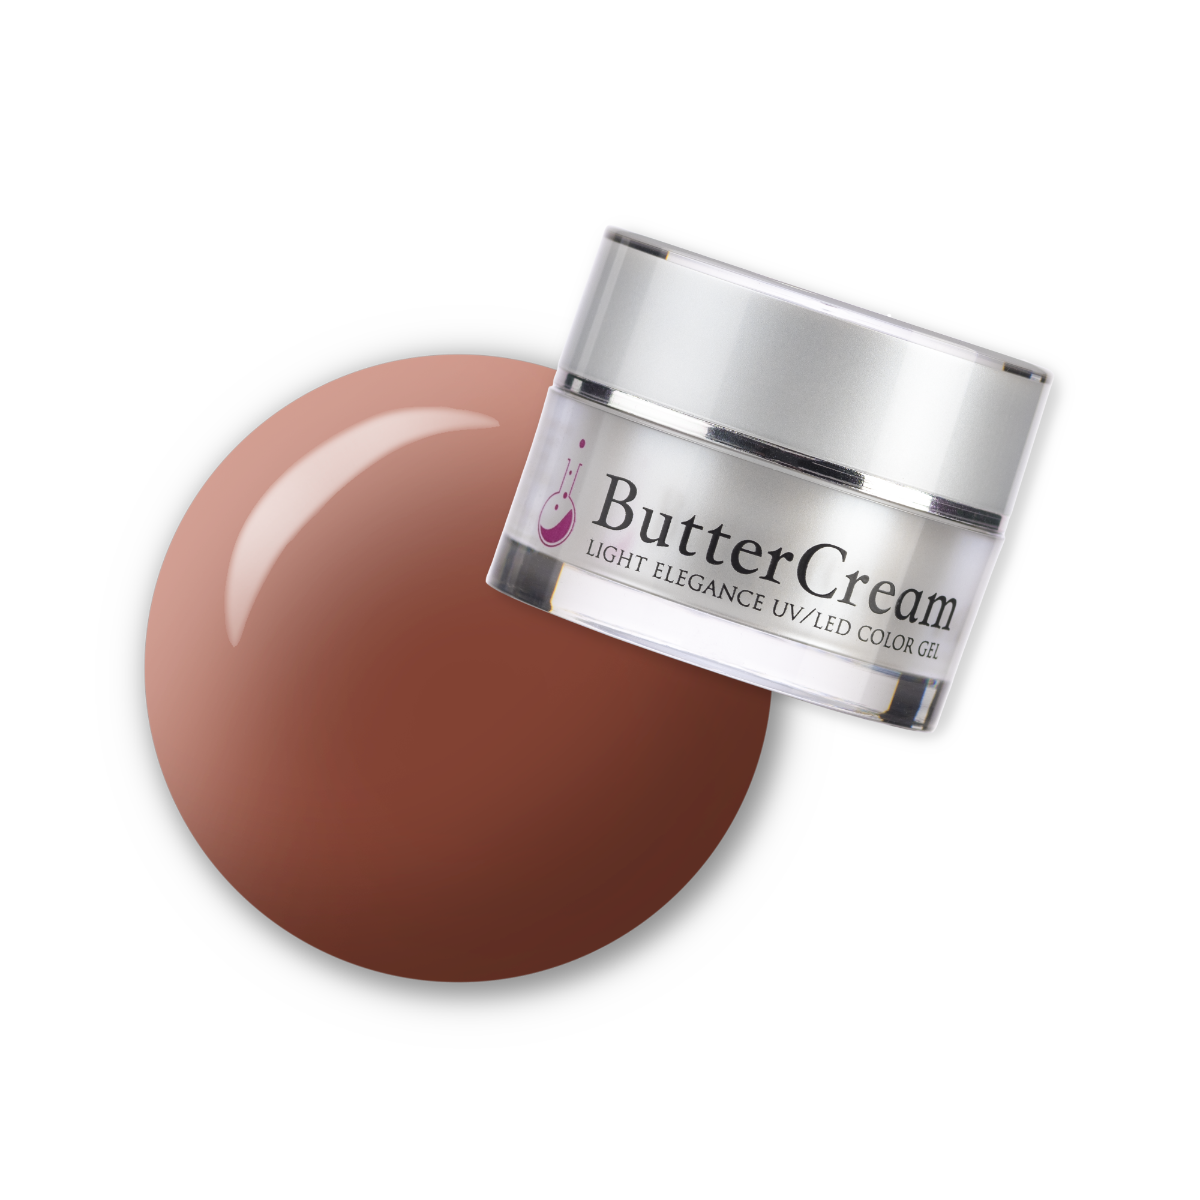 Light Elegance ButterCreams LED/UV - Can You Dig It? - Creata Beauty - Professional Beauty Products